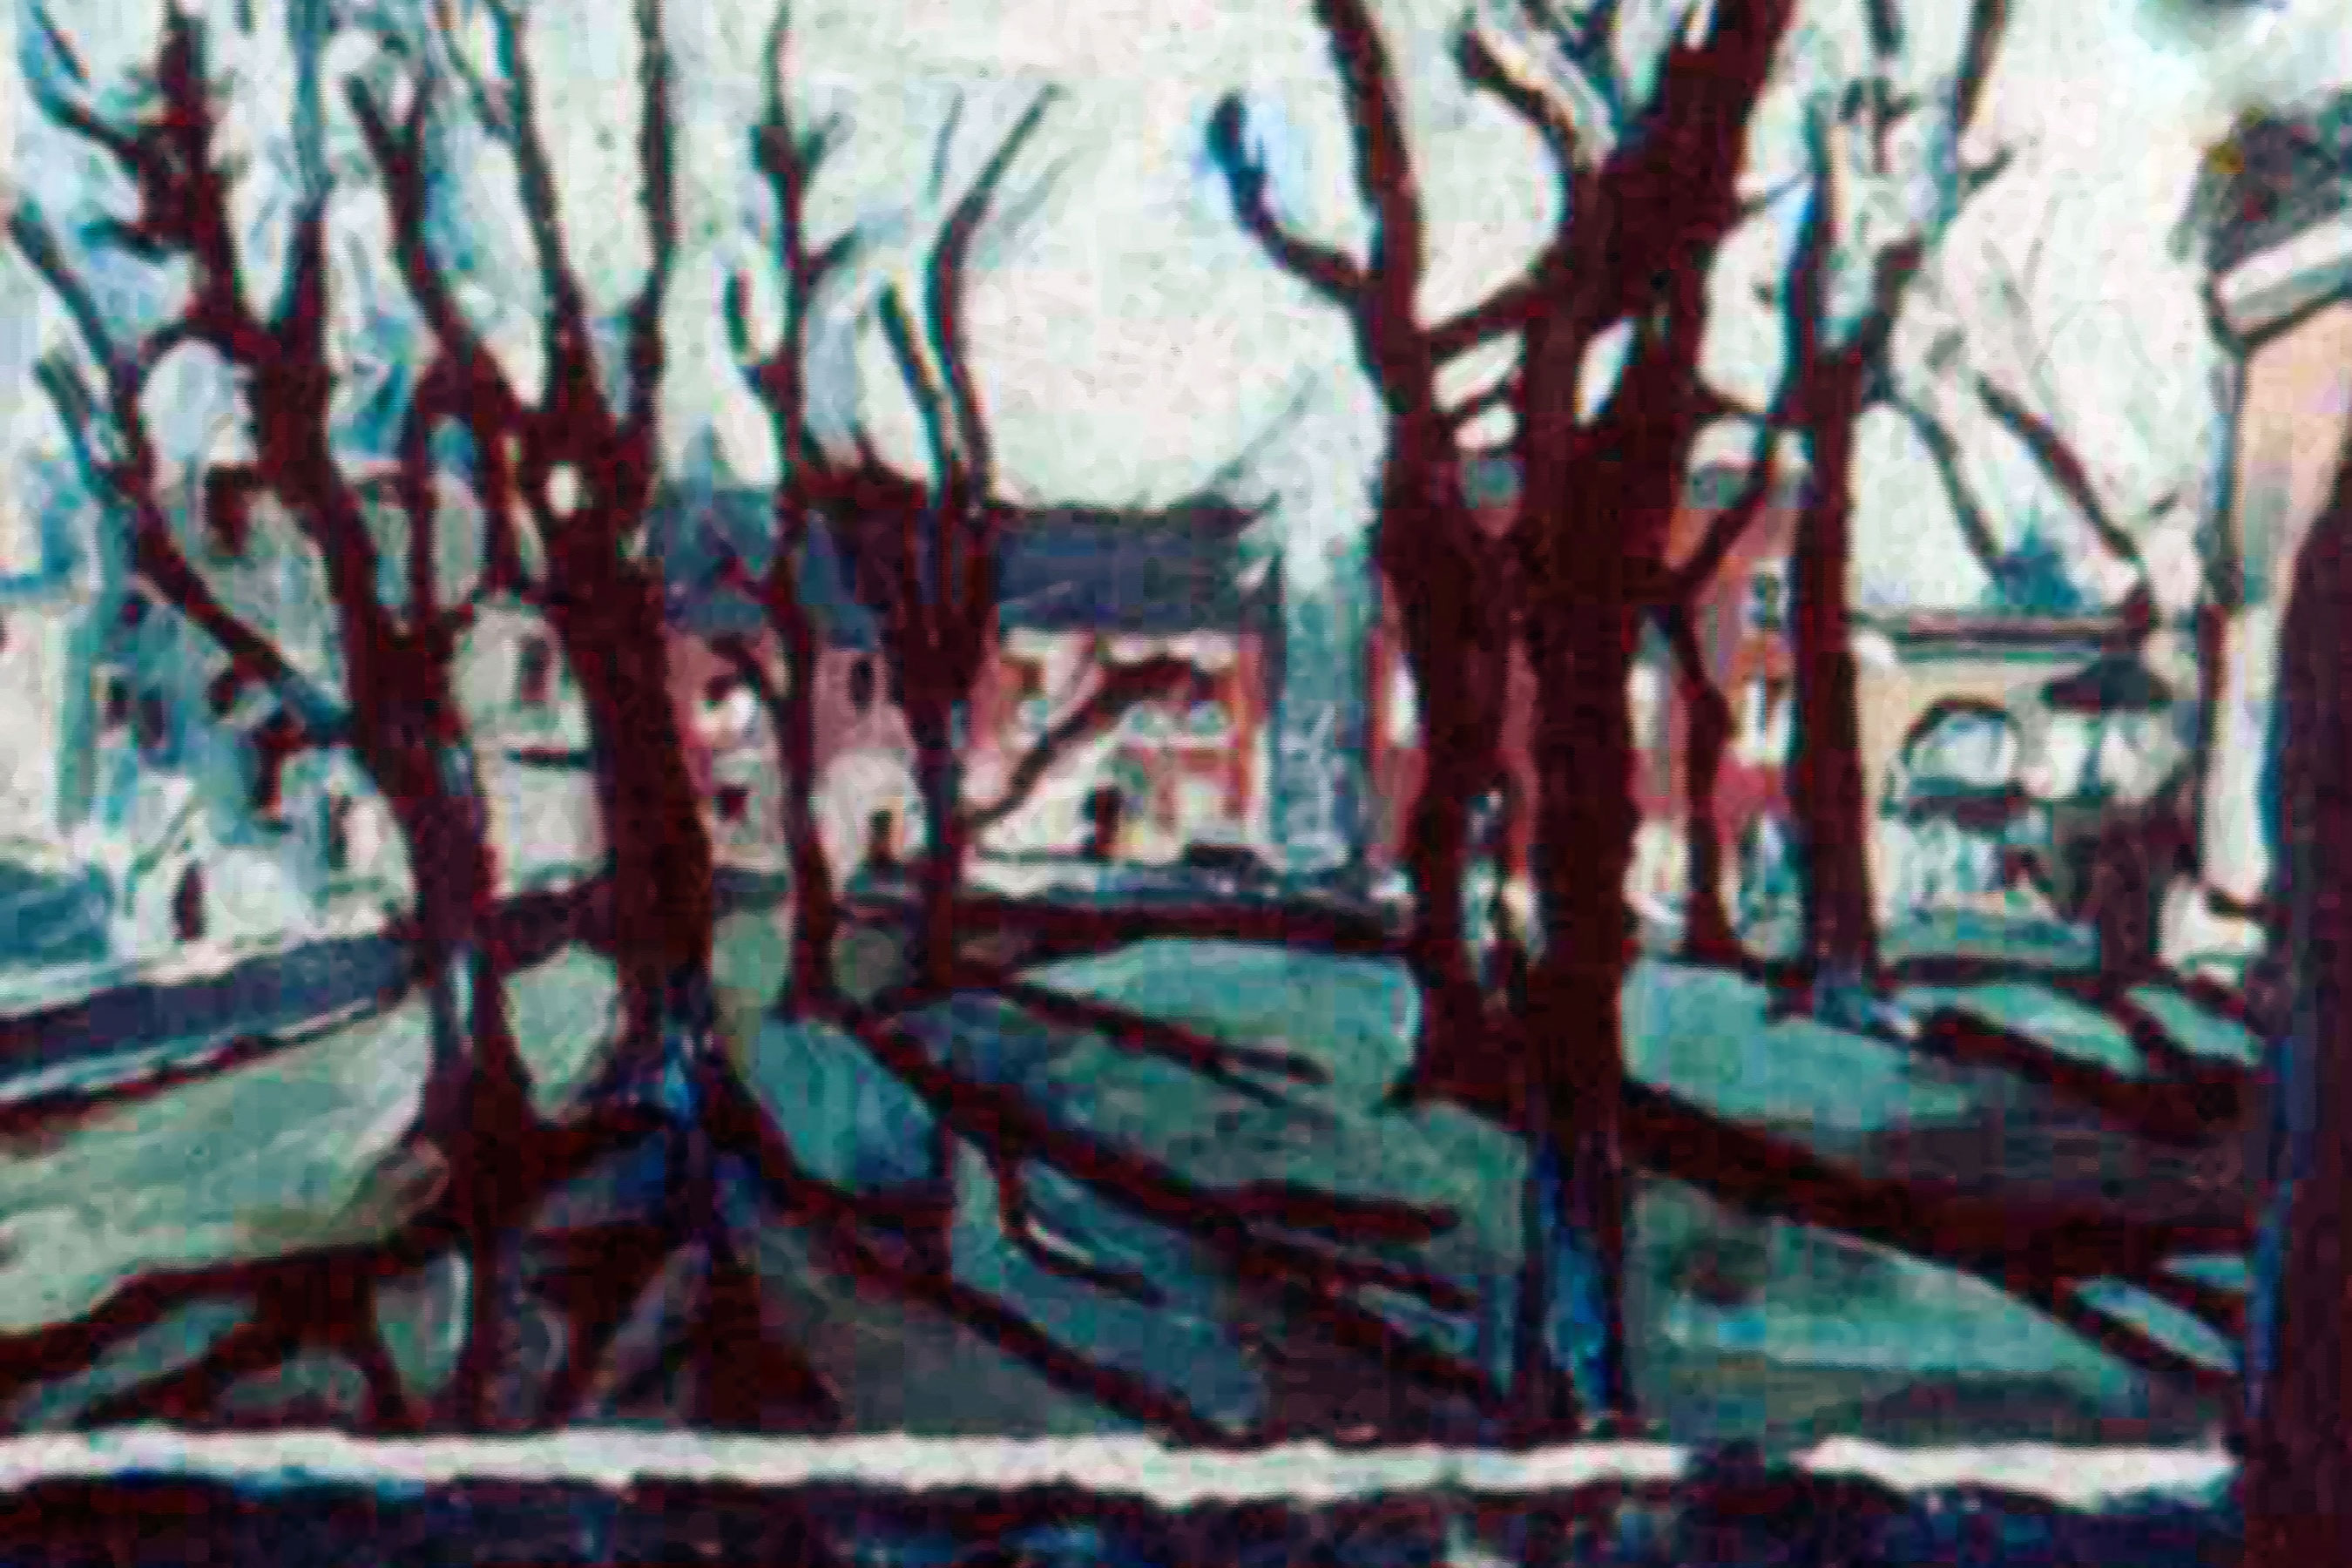 Shepherdstown: Bare Trees on the Lawn